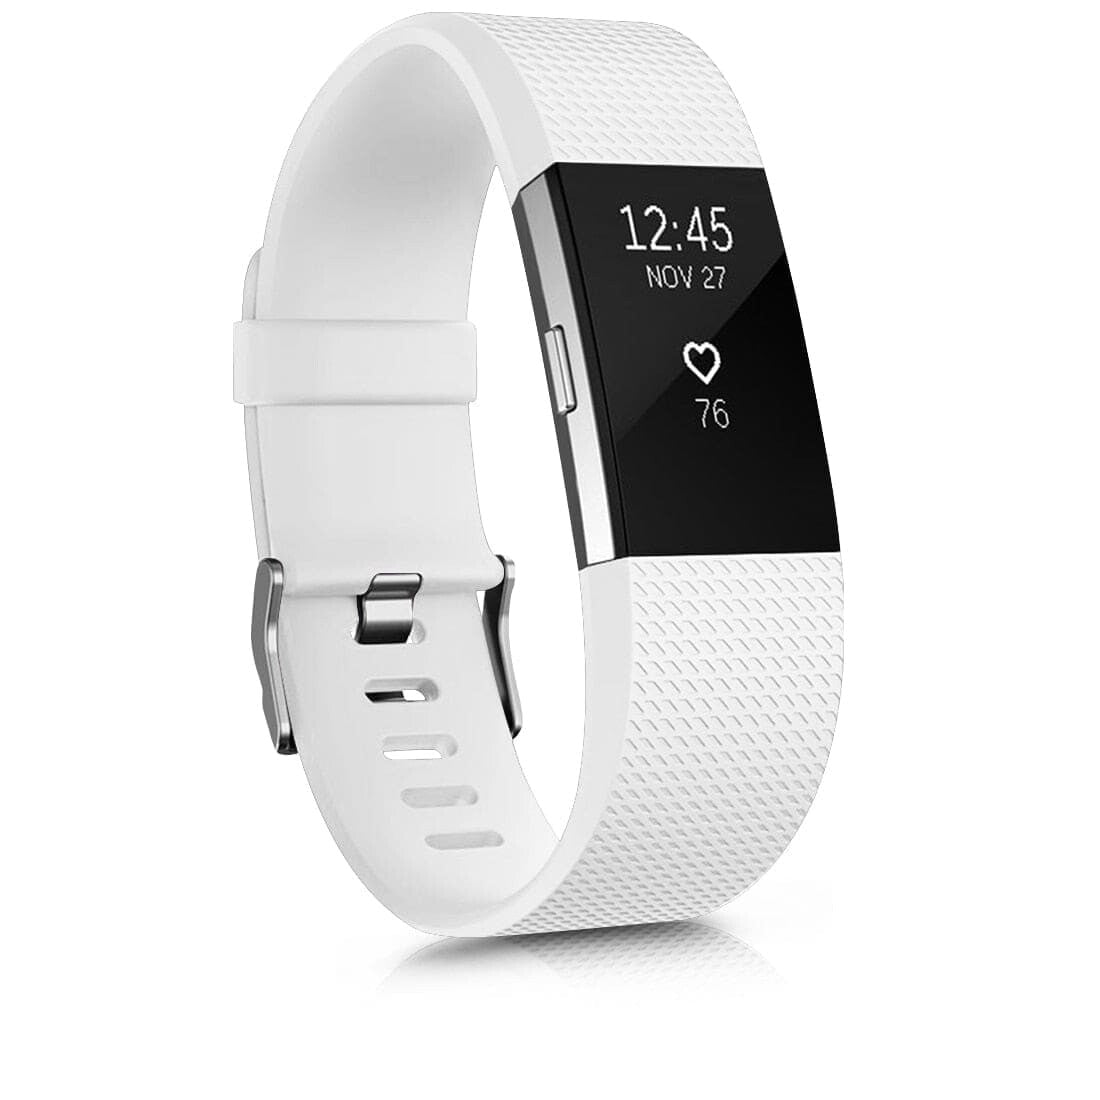 Silikon Armband für Fitbit Charge 2 - Weiss / S - Fitbit Armband